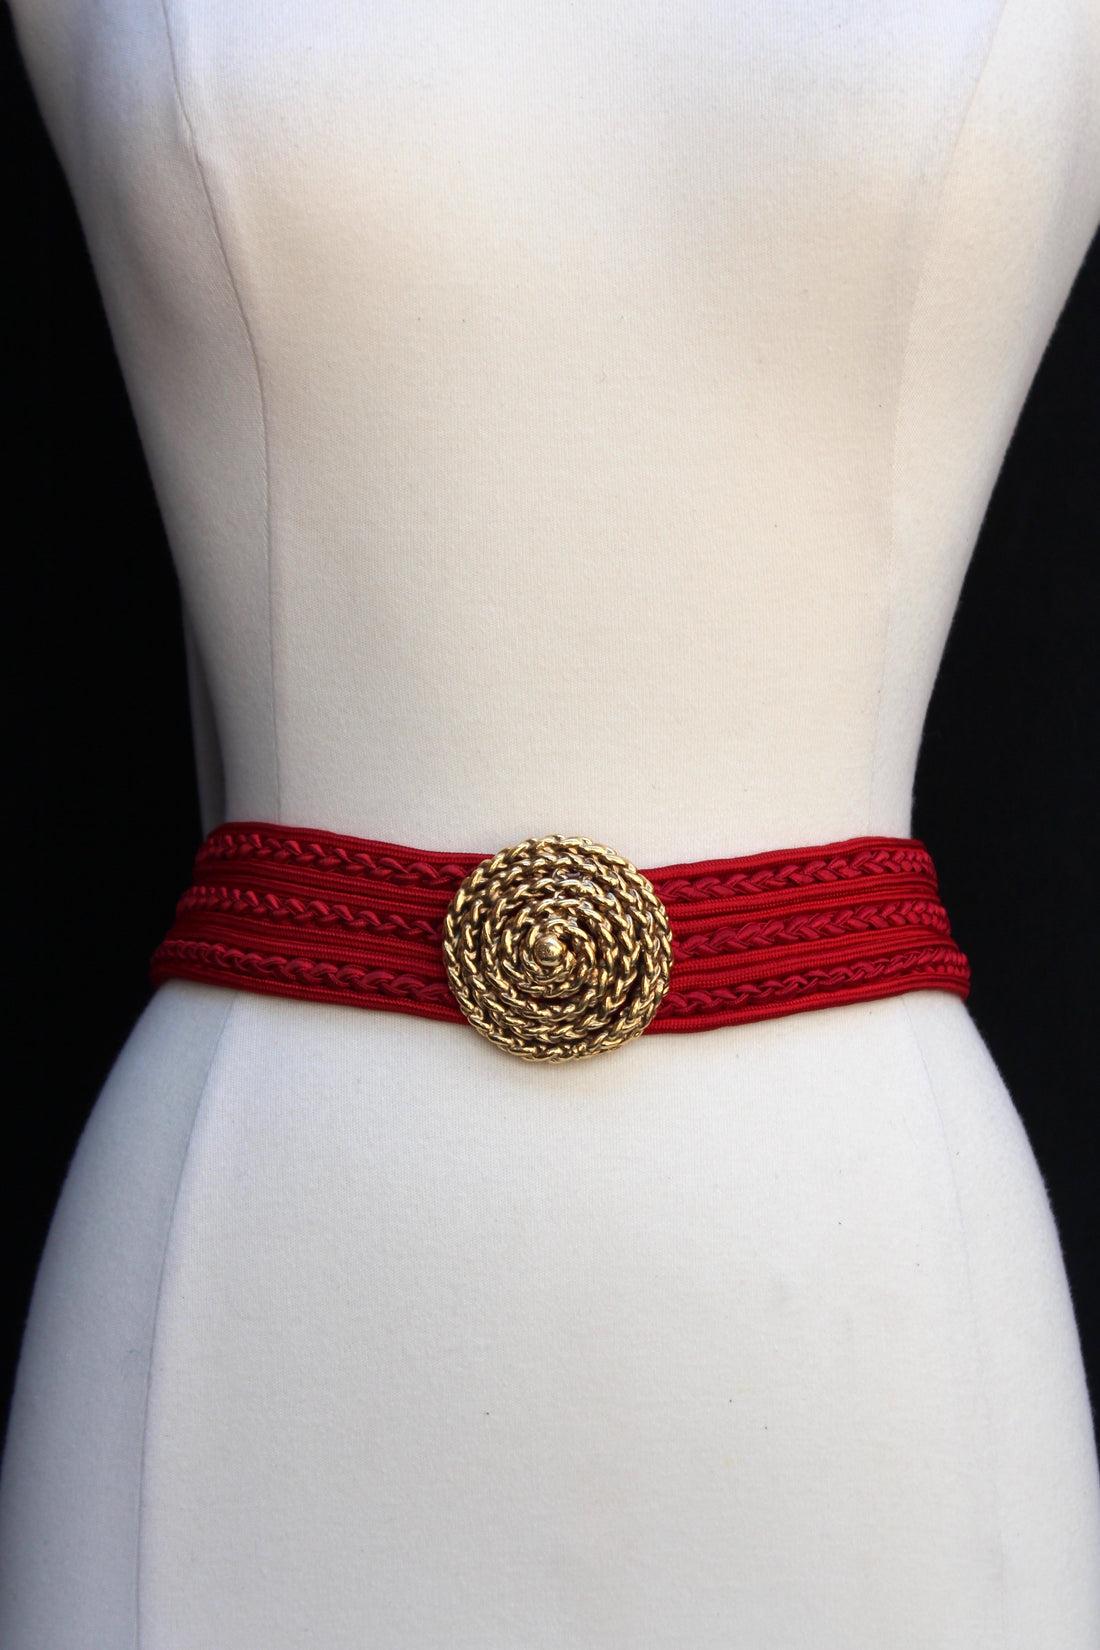 Yves Saint Laurent (Made in France) Belt composed of red passementerie, with a gilded metal buckle.

Additional information: 
Dimensions: Length: 66 cm (25.98 in) x Width: 4 cm (1.57 in) - Buckle diameter: 5.7 cm (2.24 in)
Condition: Very good